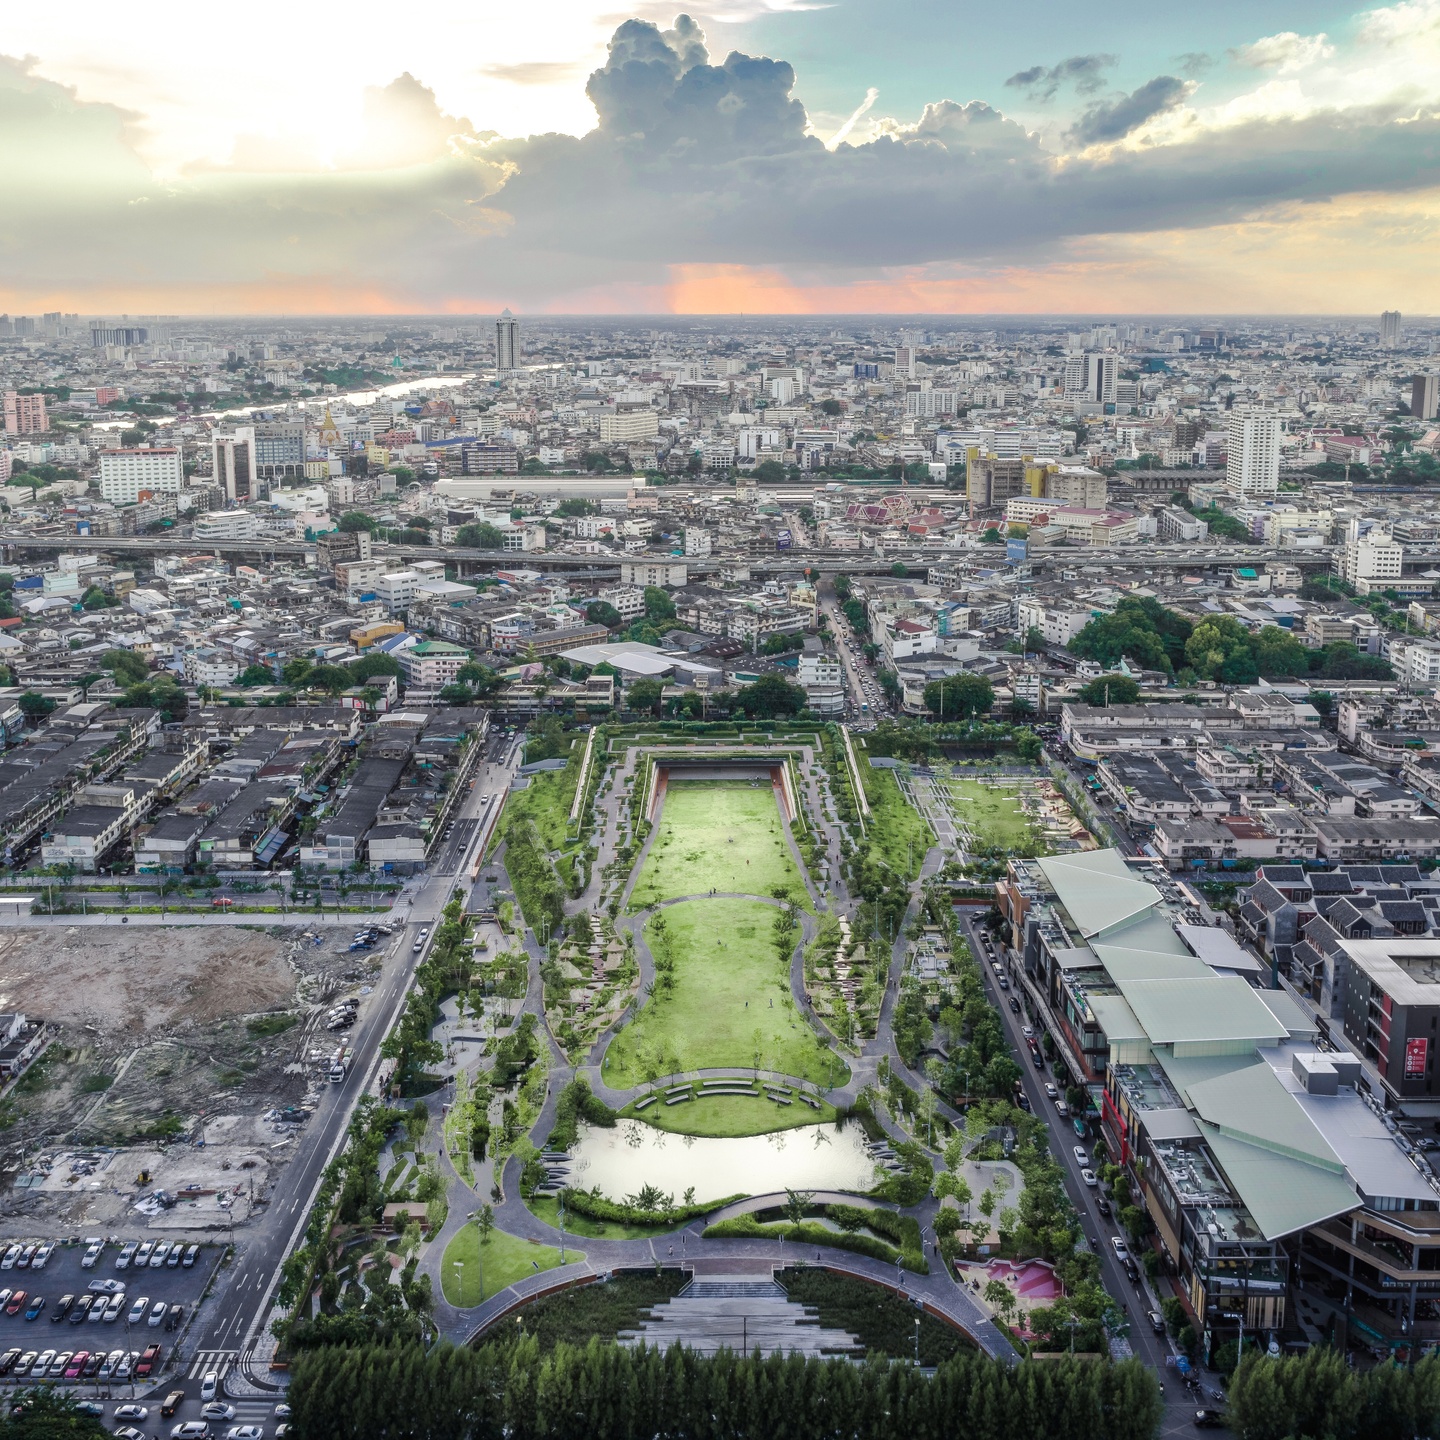 Aerial photo of a tall, rectangular green park area surrounded by a dense urban setting of buildings.